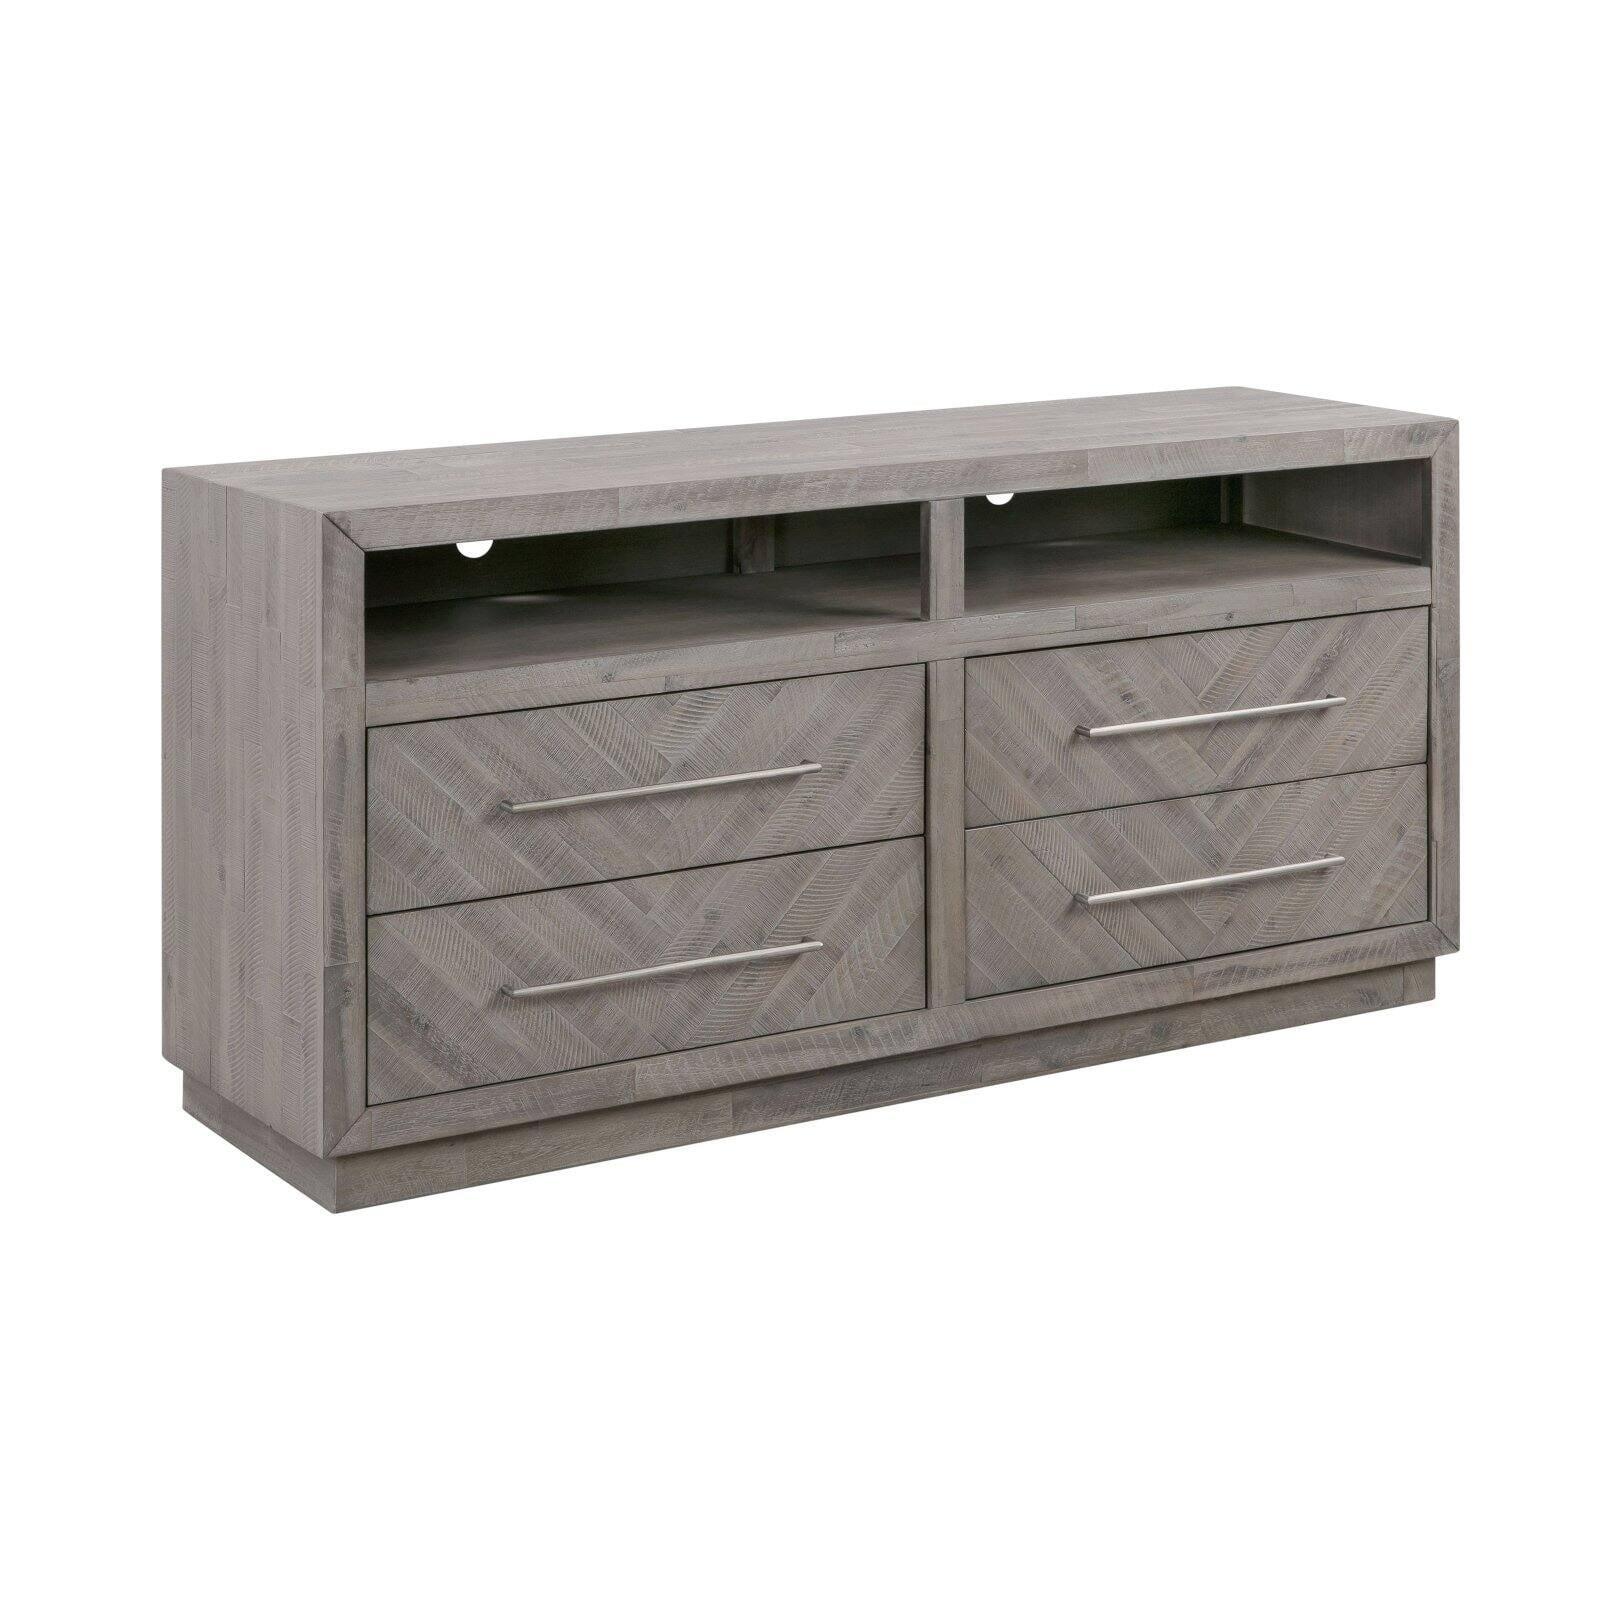 Rustic Latte 64" Solid Wood Herringbone TV Stand with Cabinet